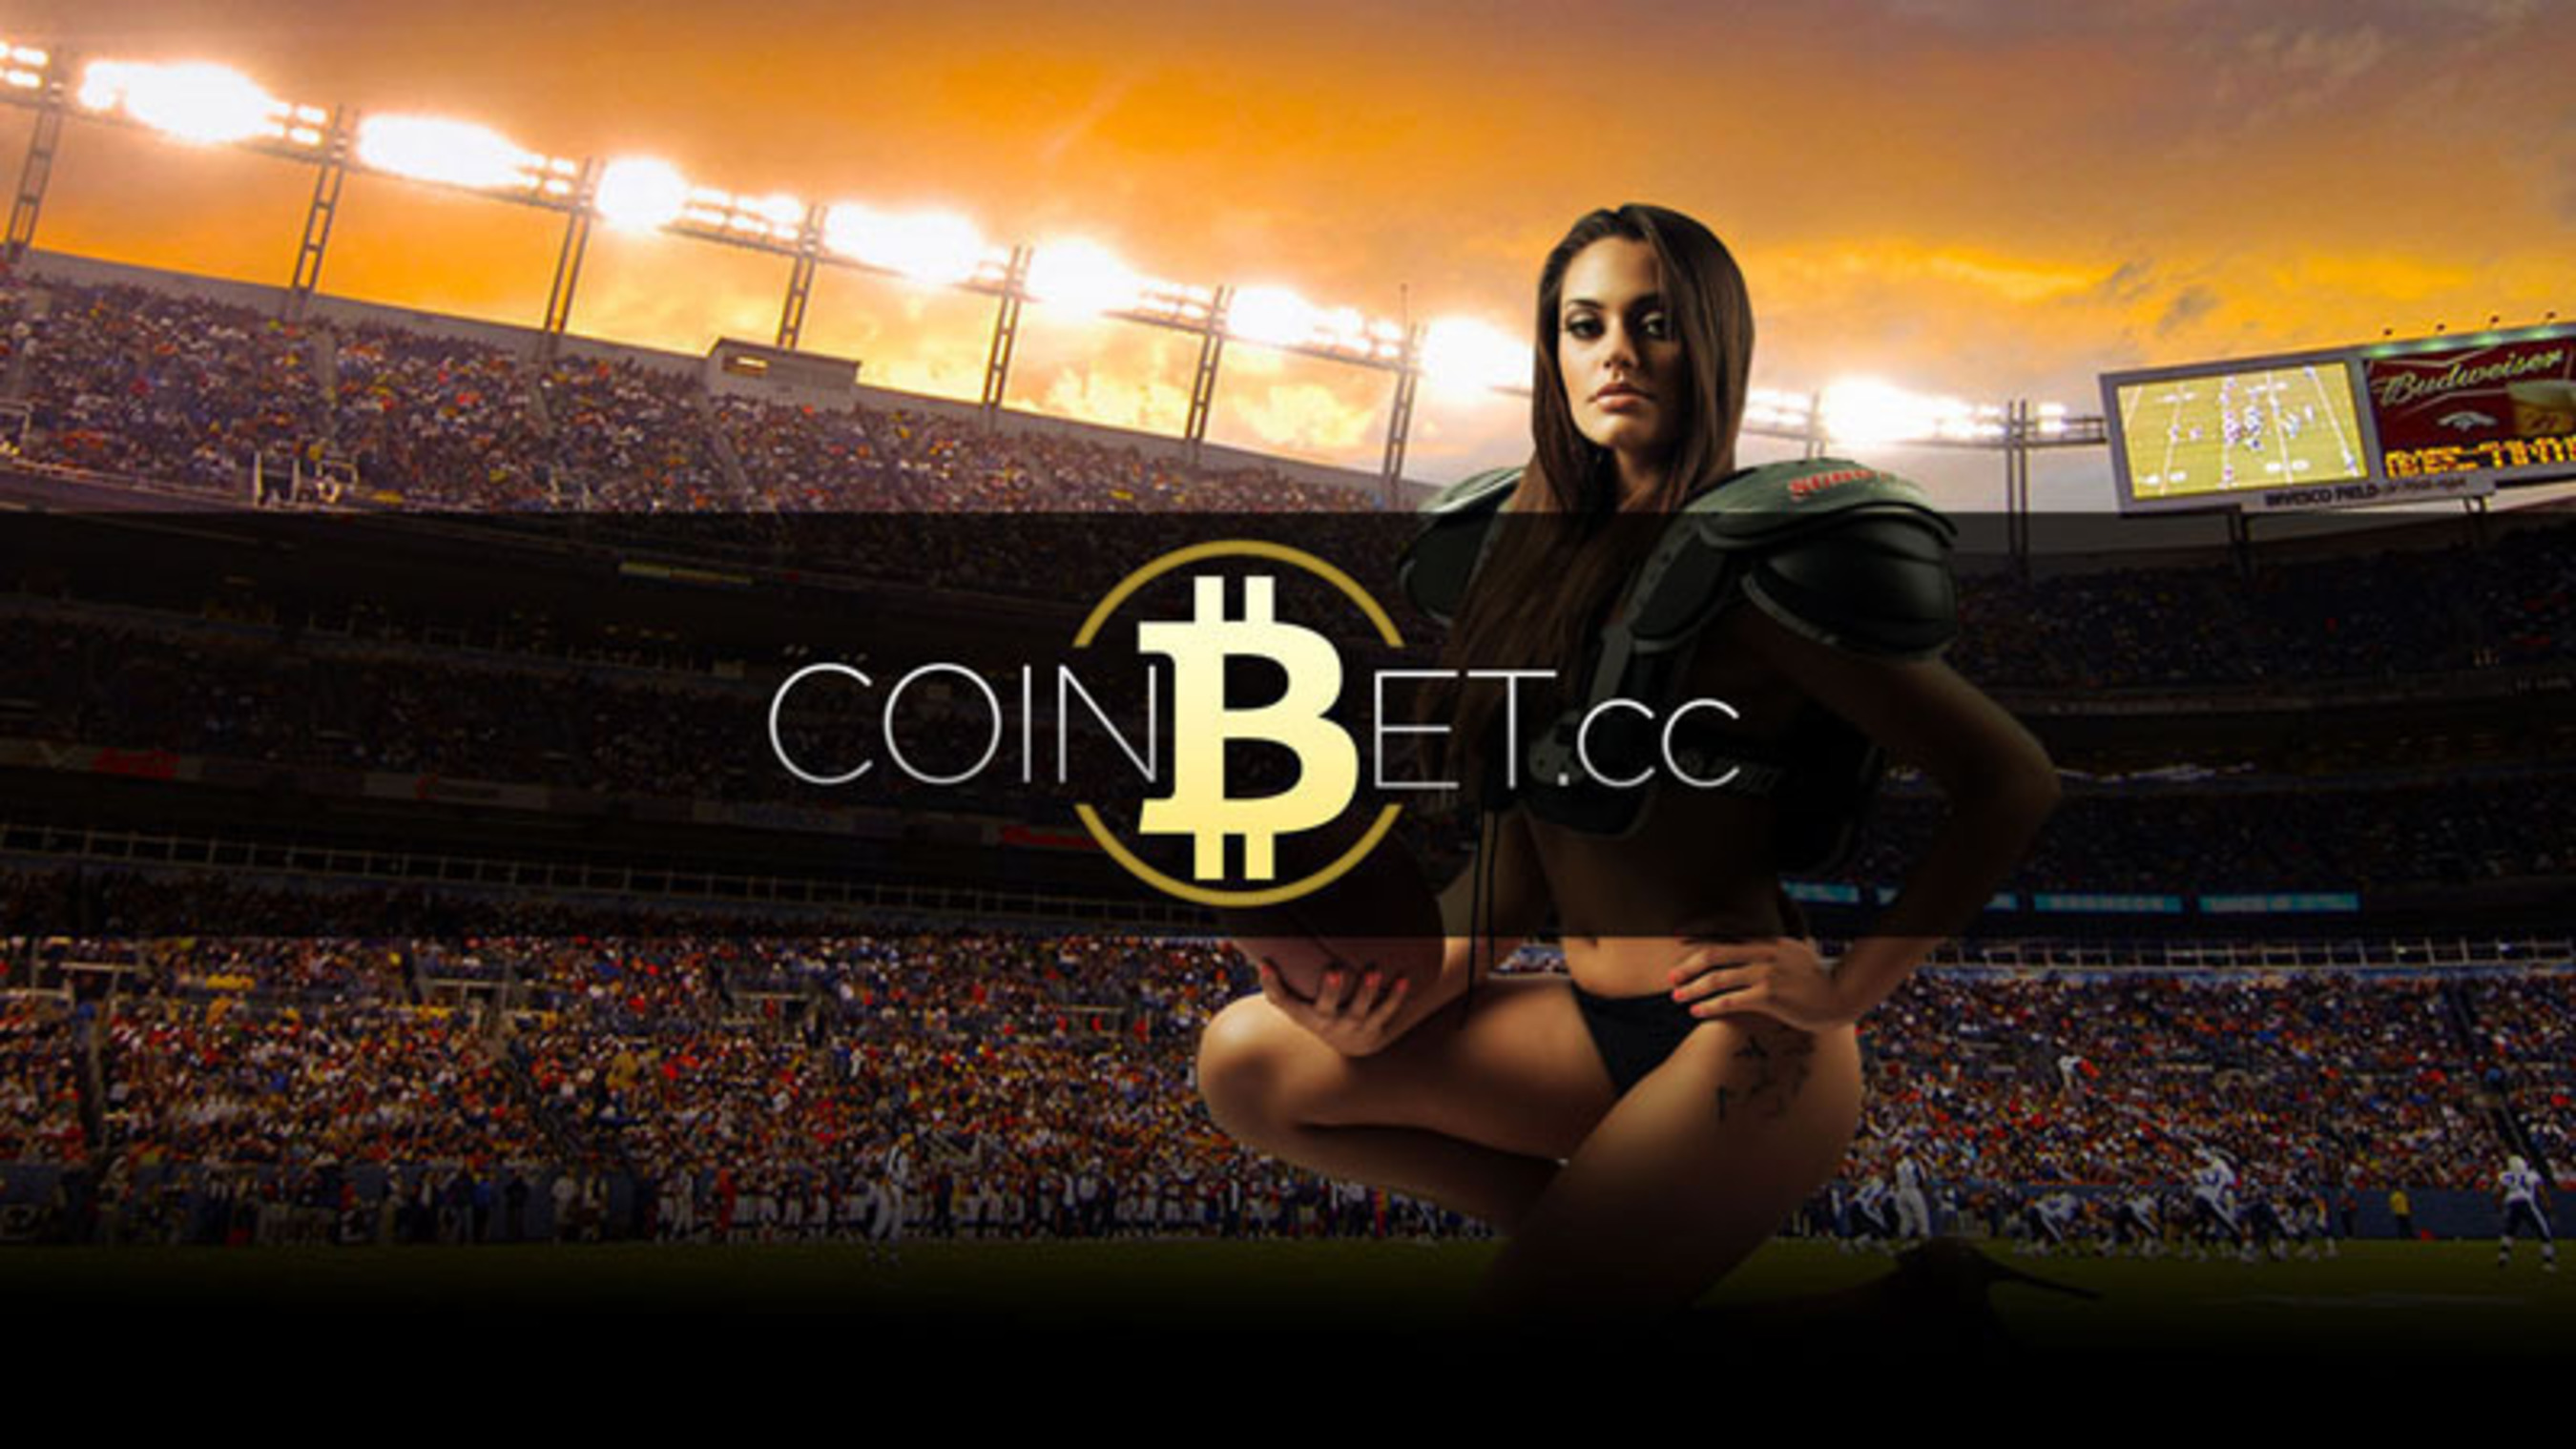 CoinBet(R) is not only the first to bring legal online gambling back for U.S. residents, but we are also the first bitcoin processing online sportsbook & Casino EVER to process cash payouts for players within 30 minutes of a wagering result becoming final! With instant BTC deposit, instant BTC cashout, no max wagering, Facebook plugin, mobile app, and even a fully anonymous registration option, We clearly offer you advantages and options that you can't find anywhere else!(PRNewsFoto/CoinBet Interactive Gaming, S.A) (PRNewsFoto/COINBET INTERACTIVE GAMING, S.A)